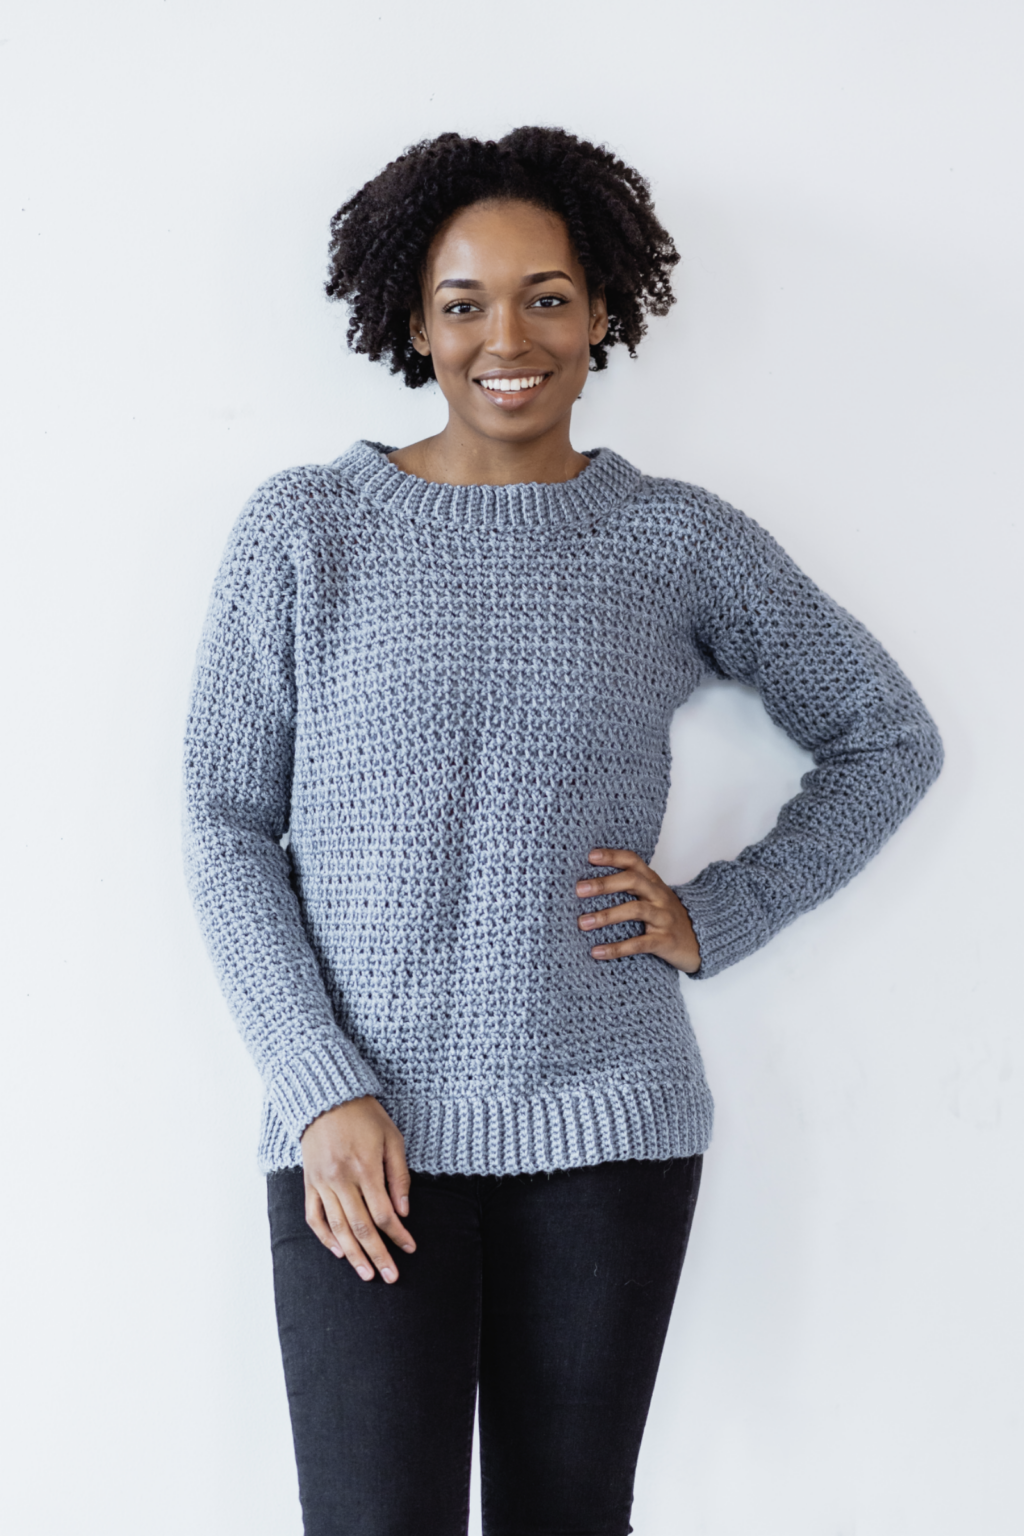 15 Easy Crochet Sweater Patterns Perfect for Beginners